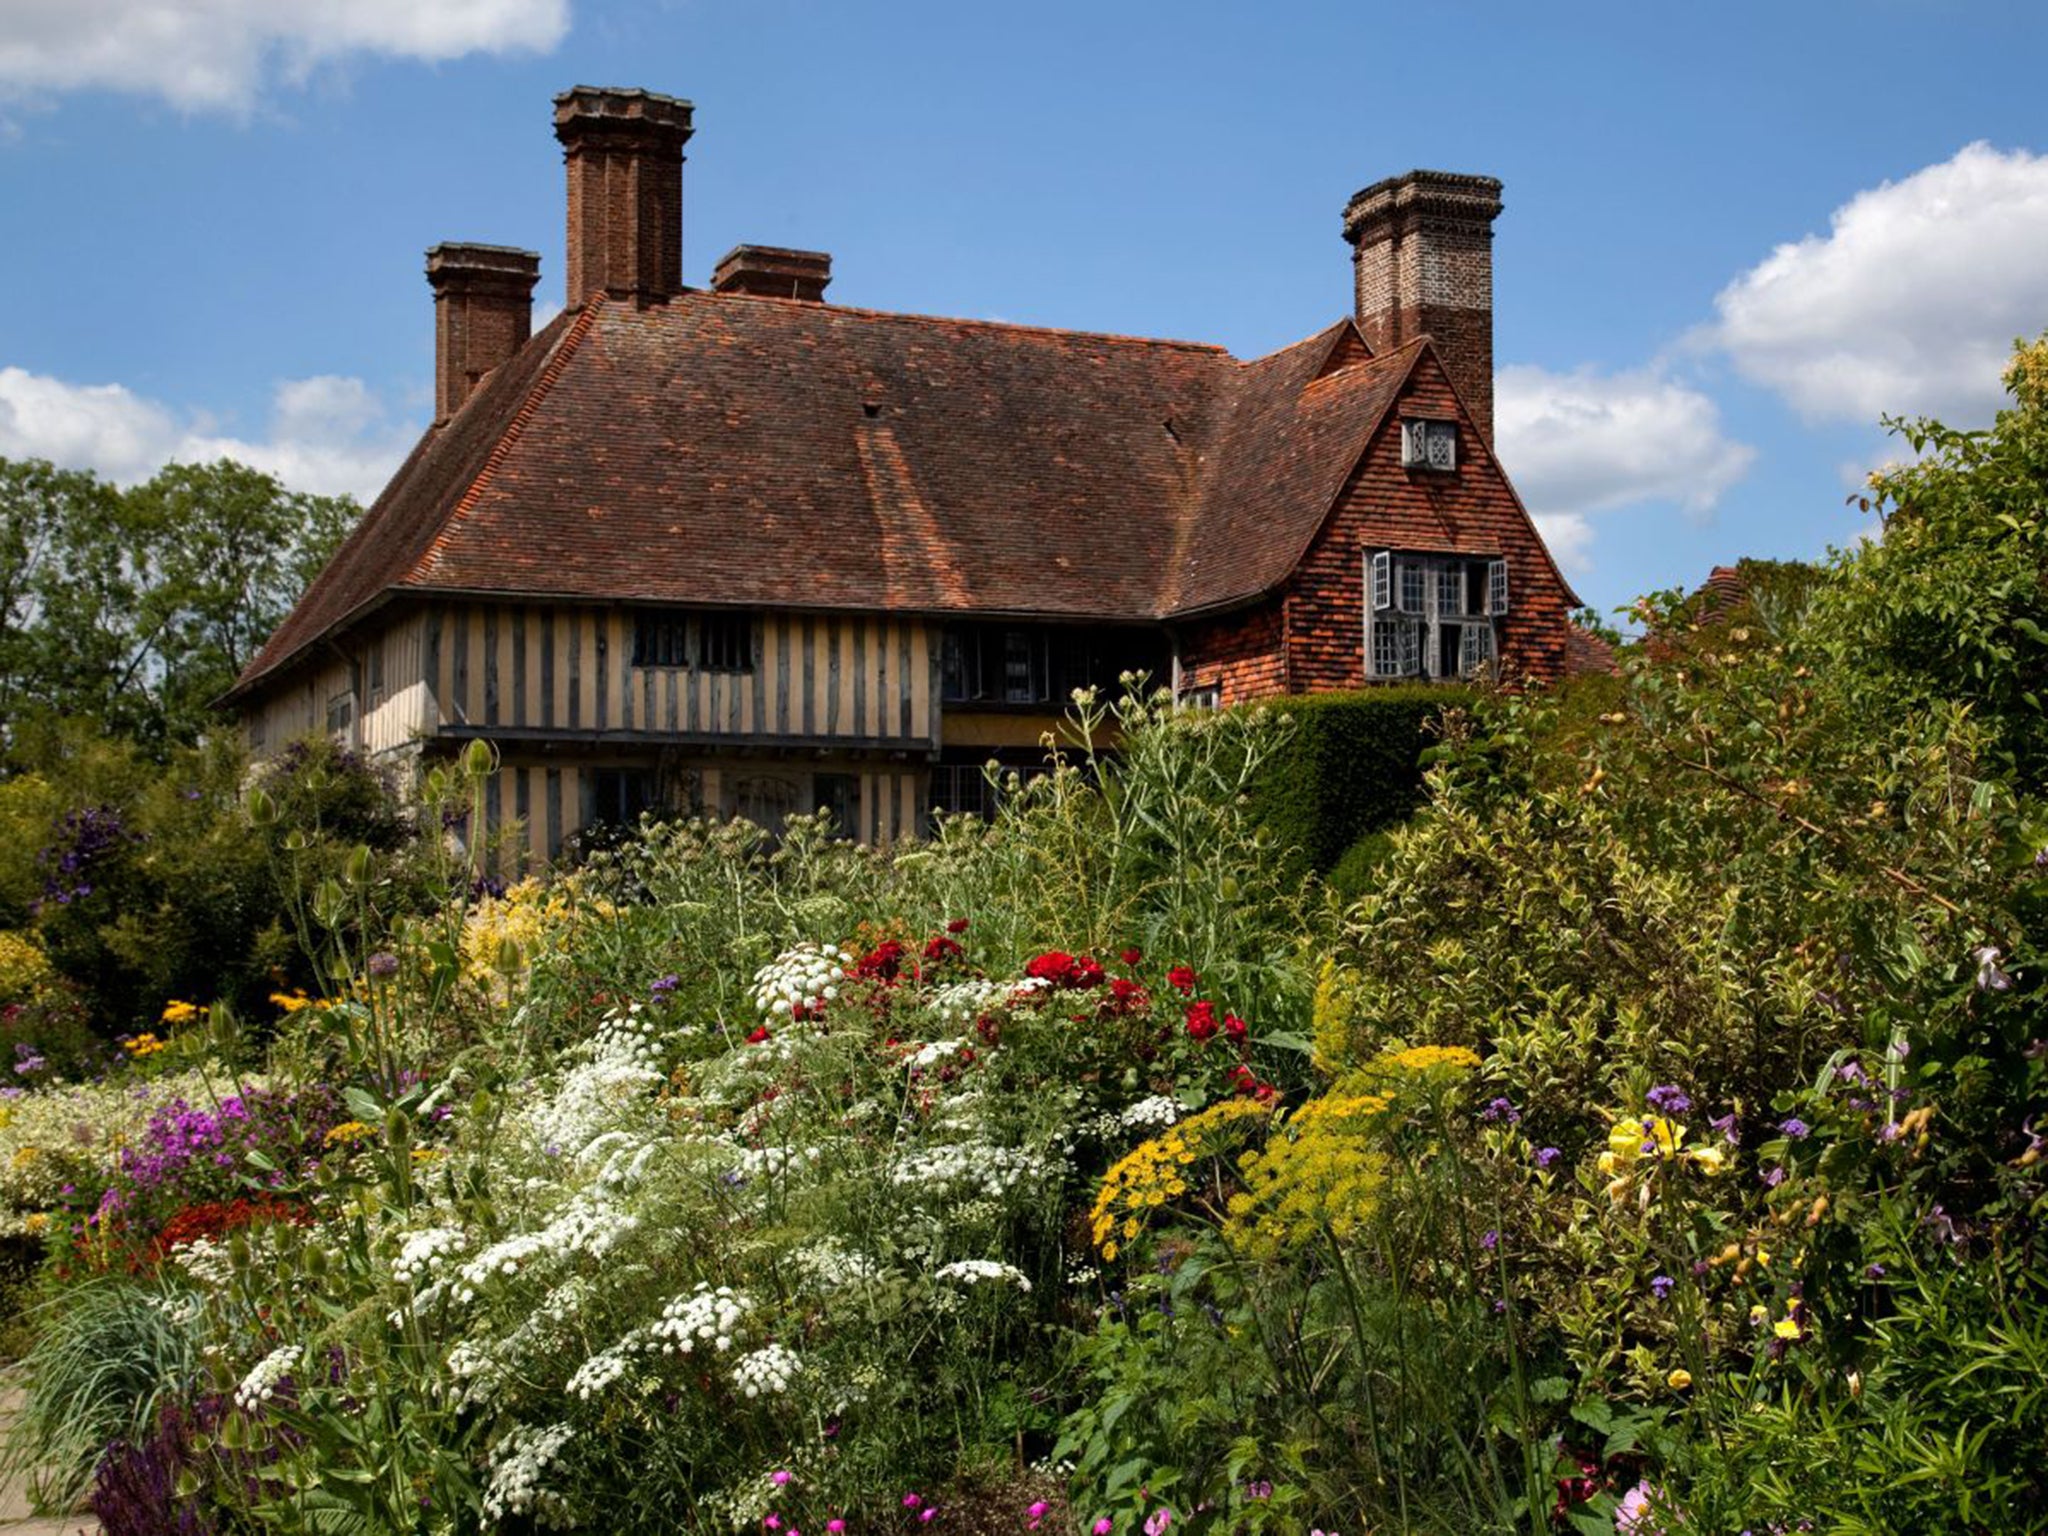 Full bloom: the gardens at Great Dixter house in East Sussex